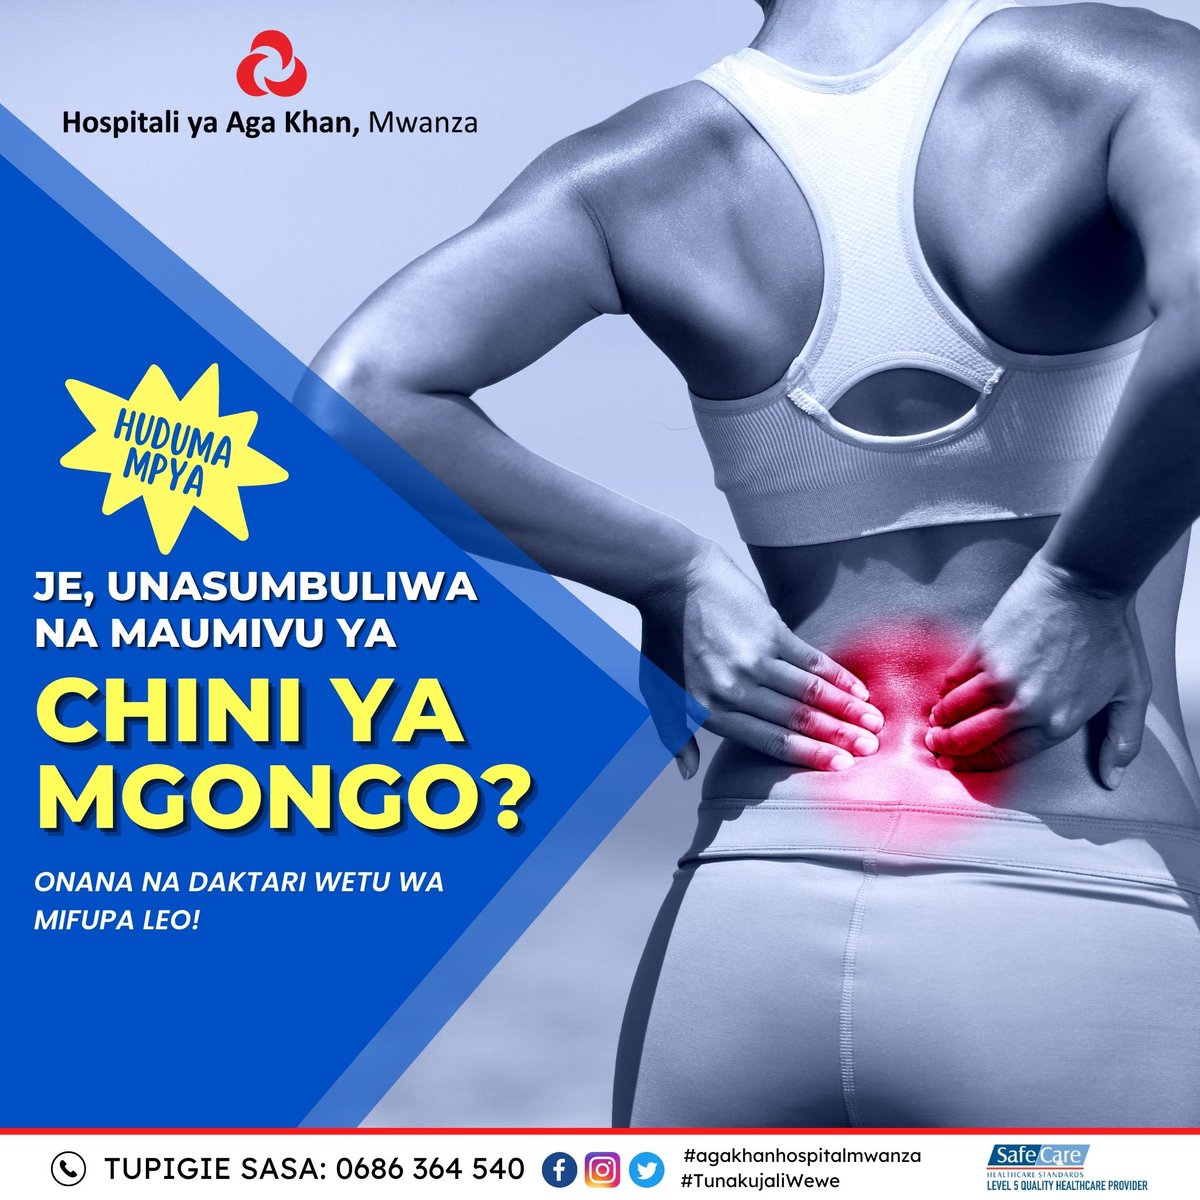 Are you experiencing lower back pain?  Consult our Orthopedic now available at The Aga Khan Hospital, Mwanza. For appointments call 0686 364 540. 

#agakhanhospitalmwanza #orthopedic #orthopedicclinic #bonedoctor #bonehealth #musclepain #jointpain #backpain #kneepain